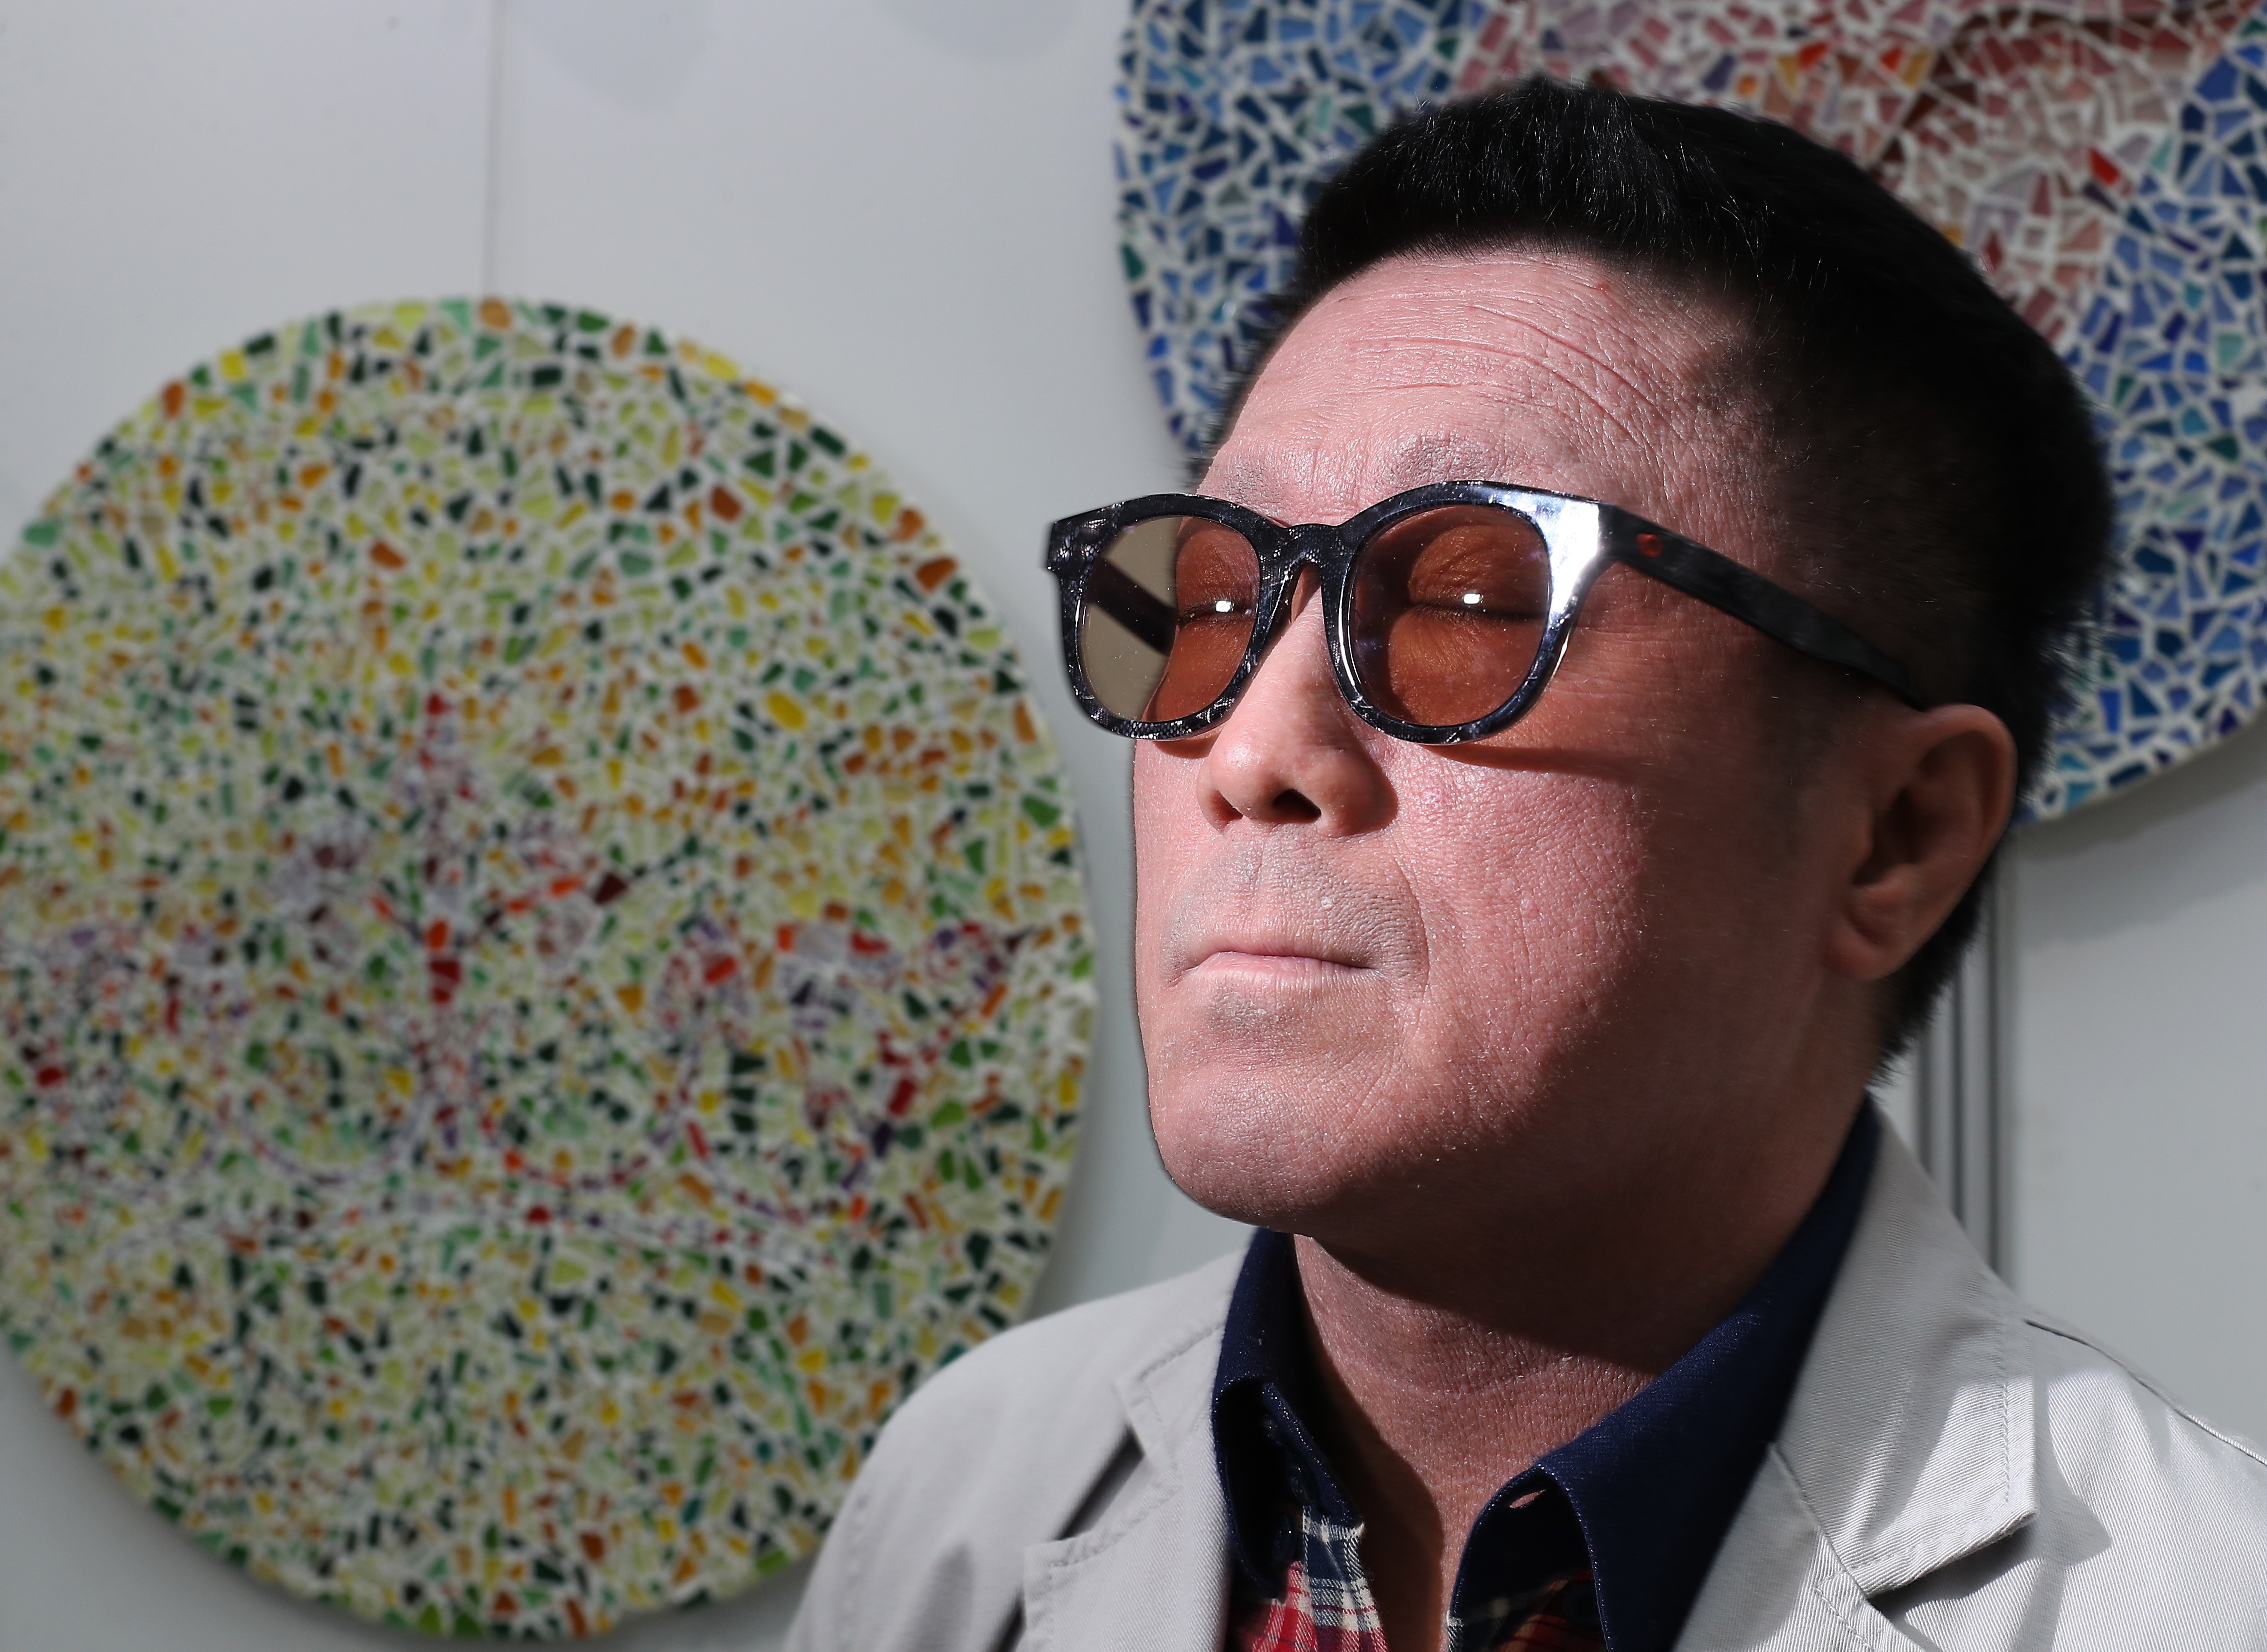 Comma Chan Hin-wang lost his vision to glaucoma, but over time found that art helped him ‘see’ again. Photo: Nora Tam